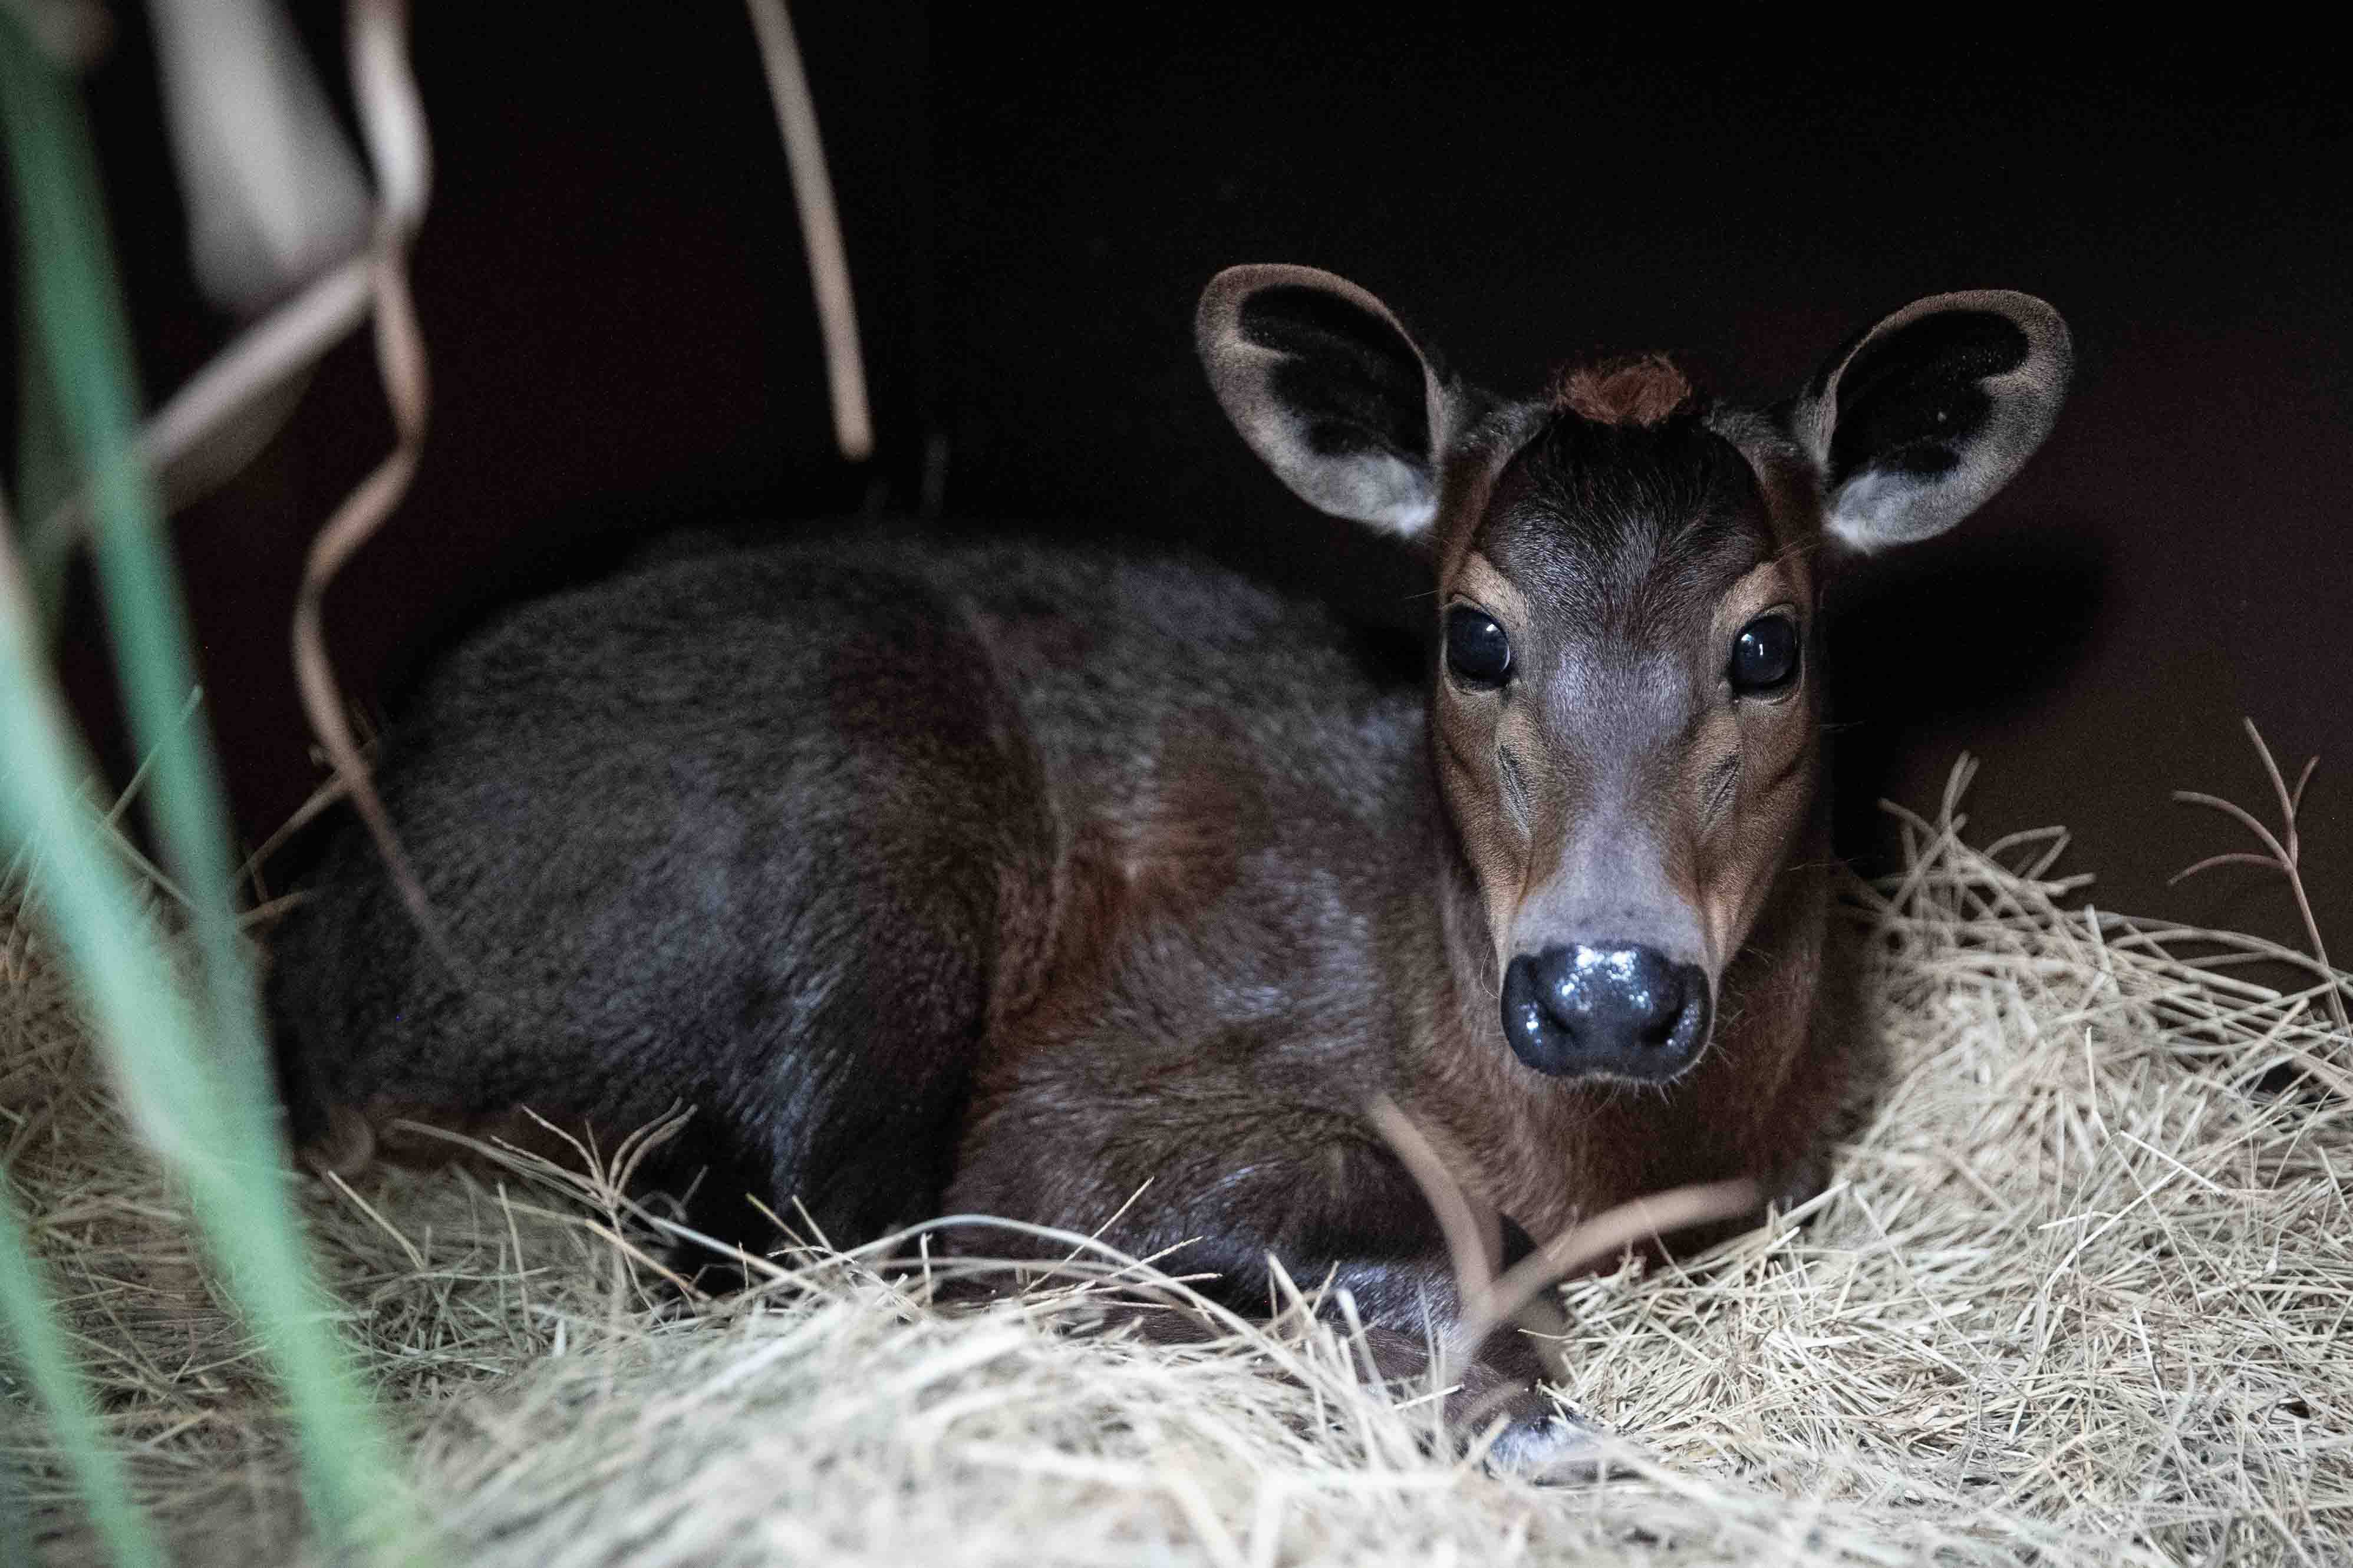 Penny, a yellow-backed duiker baby, recently made her on-stage debut at Disney's Animal Kingdom